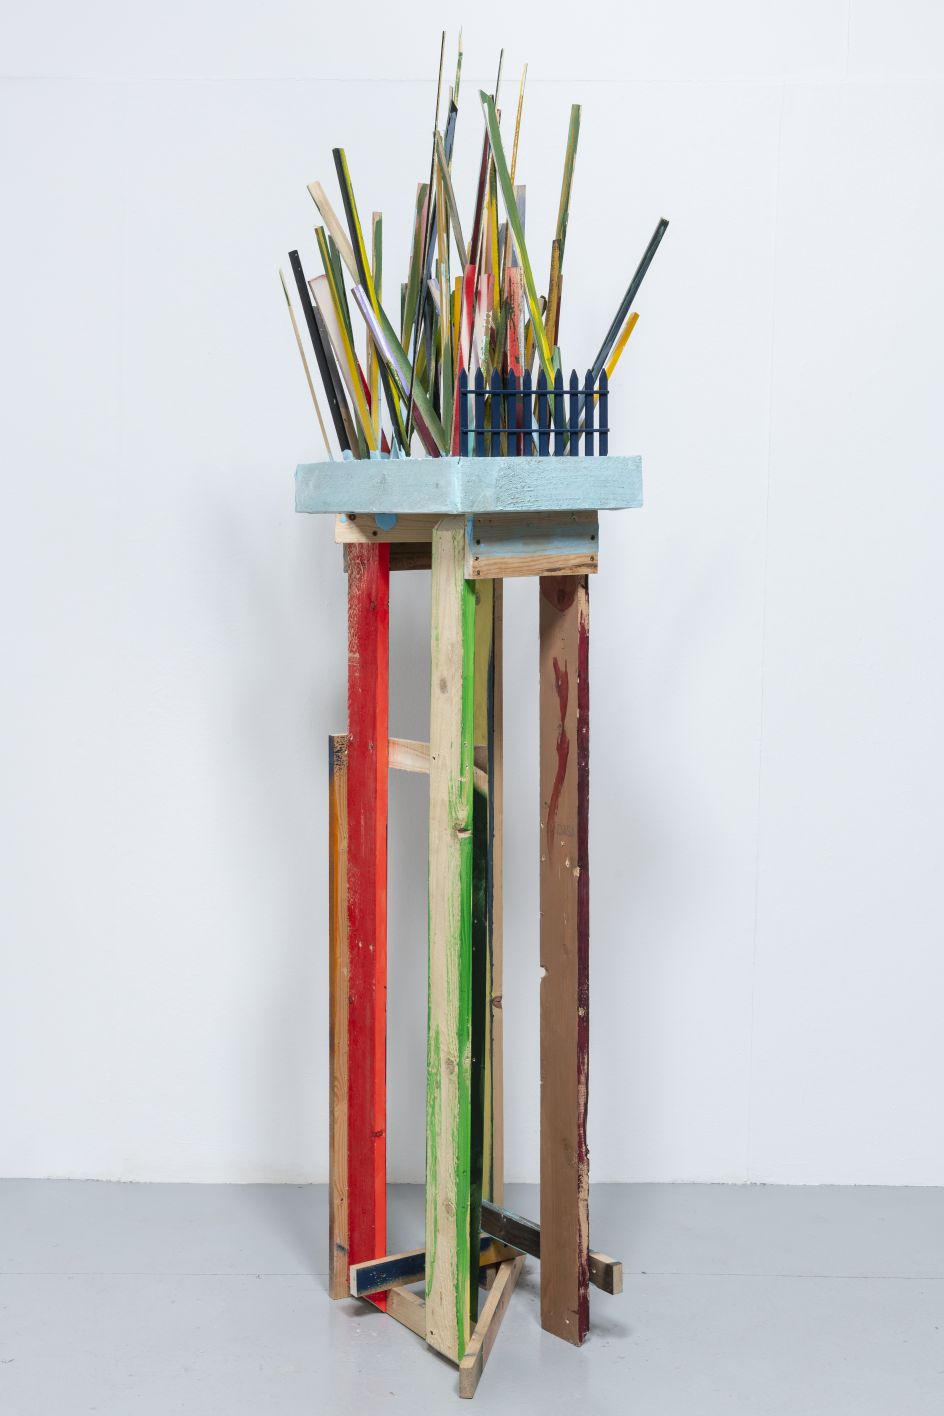 KAIM, 2019 Wood Construction Timber, Plaster and Paint 207 x 32 x 51cm